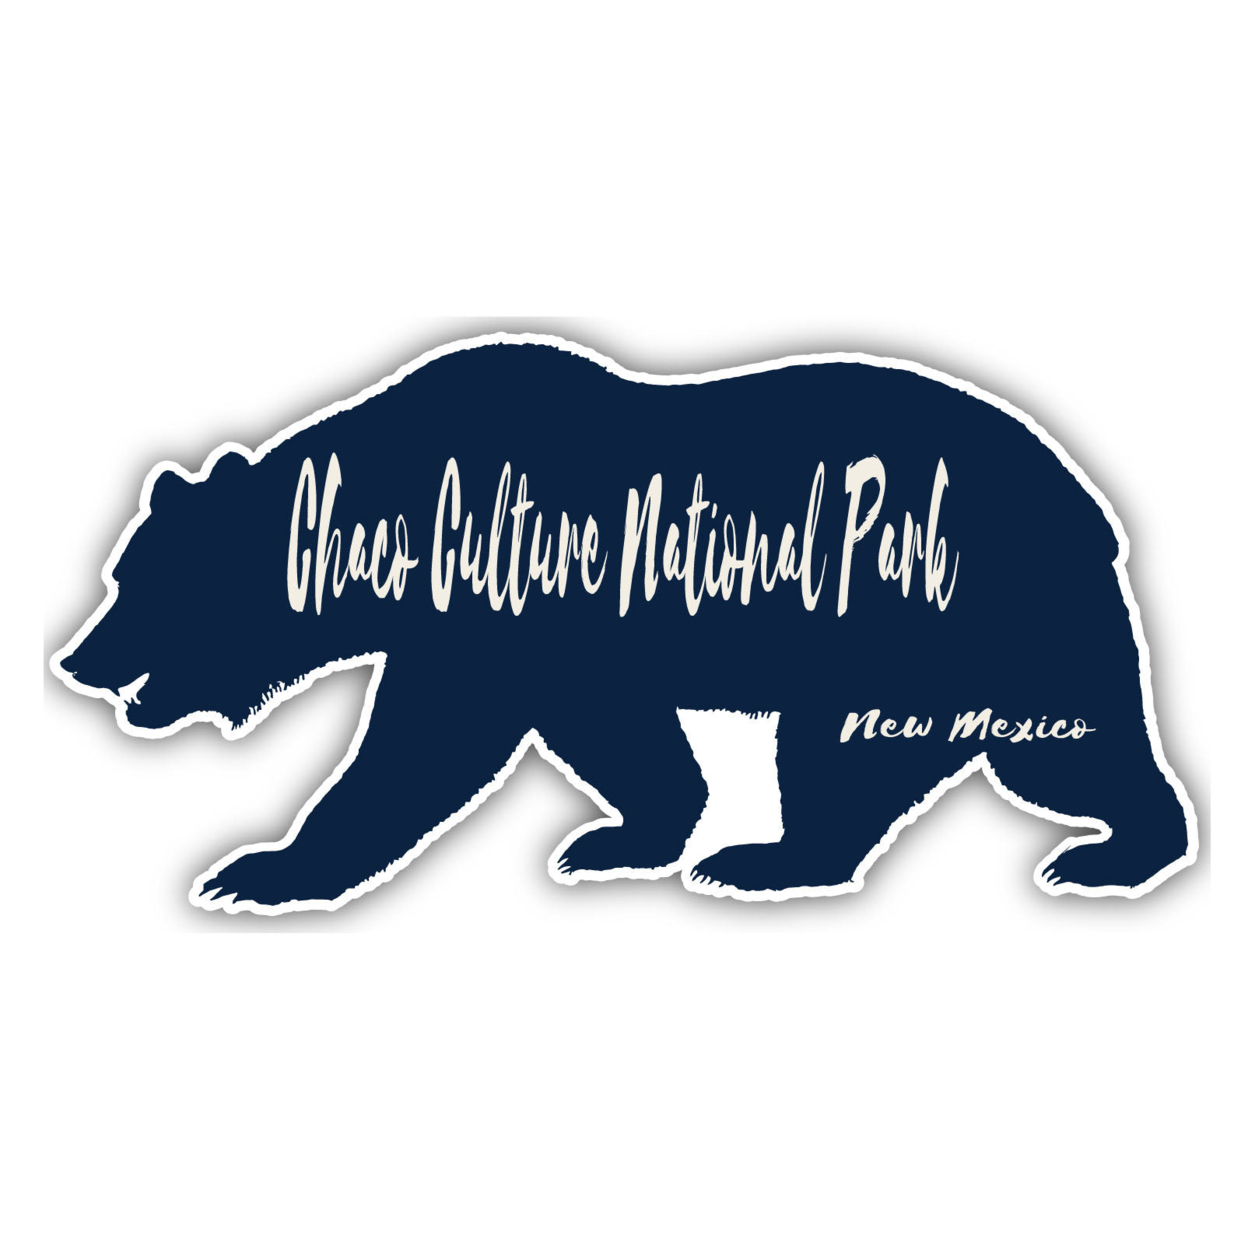 Chaco Culture National Park New Mexico Souvenir Decorative Stickers (Choose Theme And Size) - Single Unit, 2-Inch, Bear